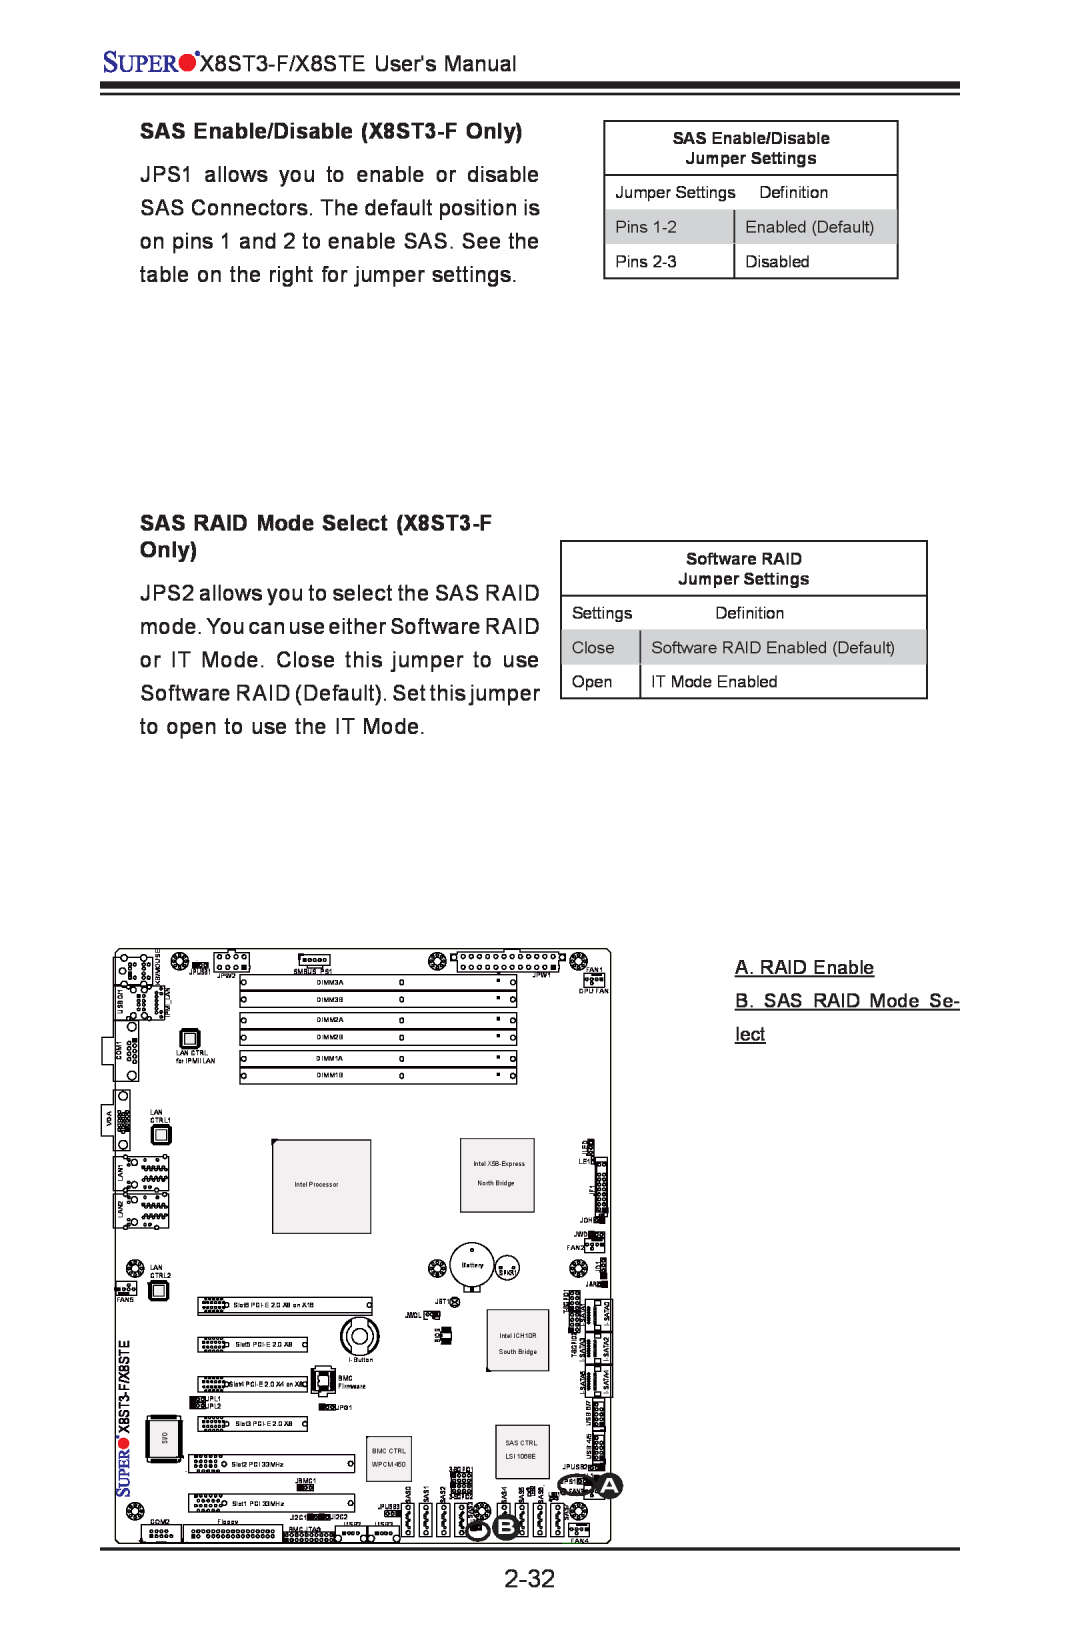 SUPER MICRO Computer X8STE user manual 2-32, SAS Enable/Disable X8ST3-F Only, SAS RAID Mode Select X8ST3-F Only 